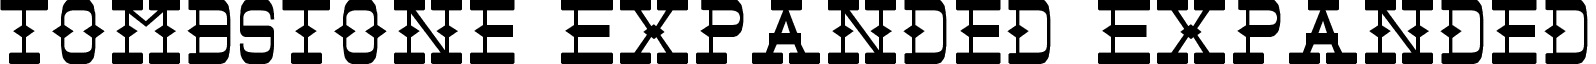 Tombstone Expanded Expanded font - Tombv2e.ttf